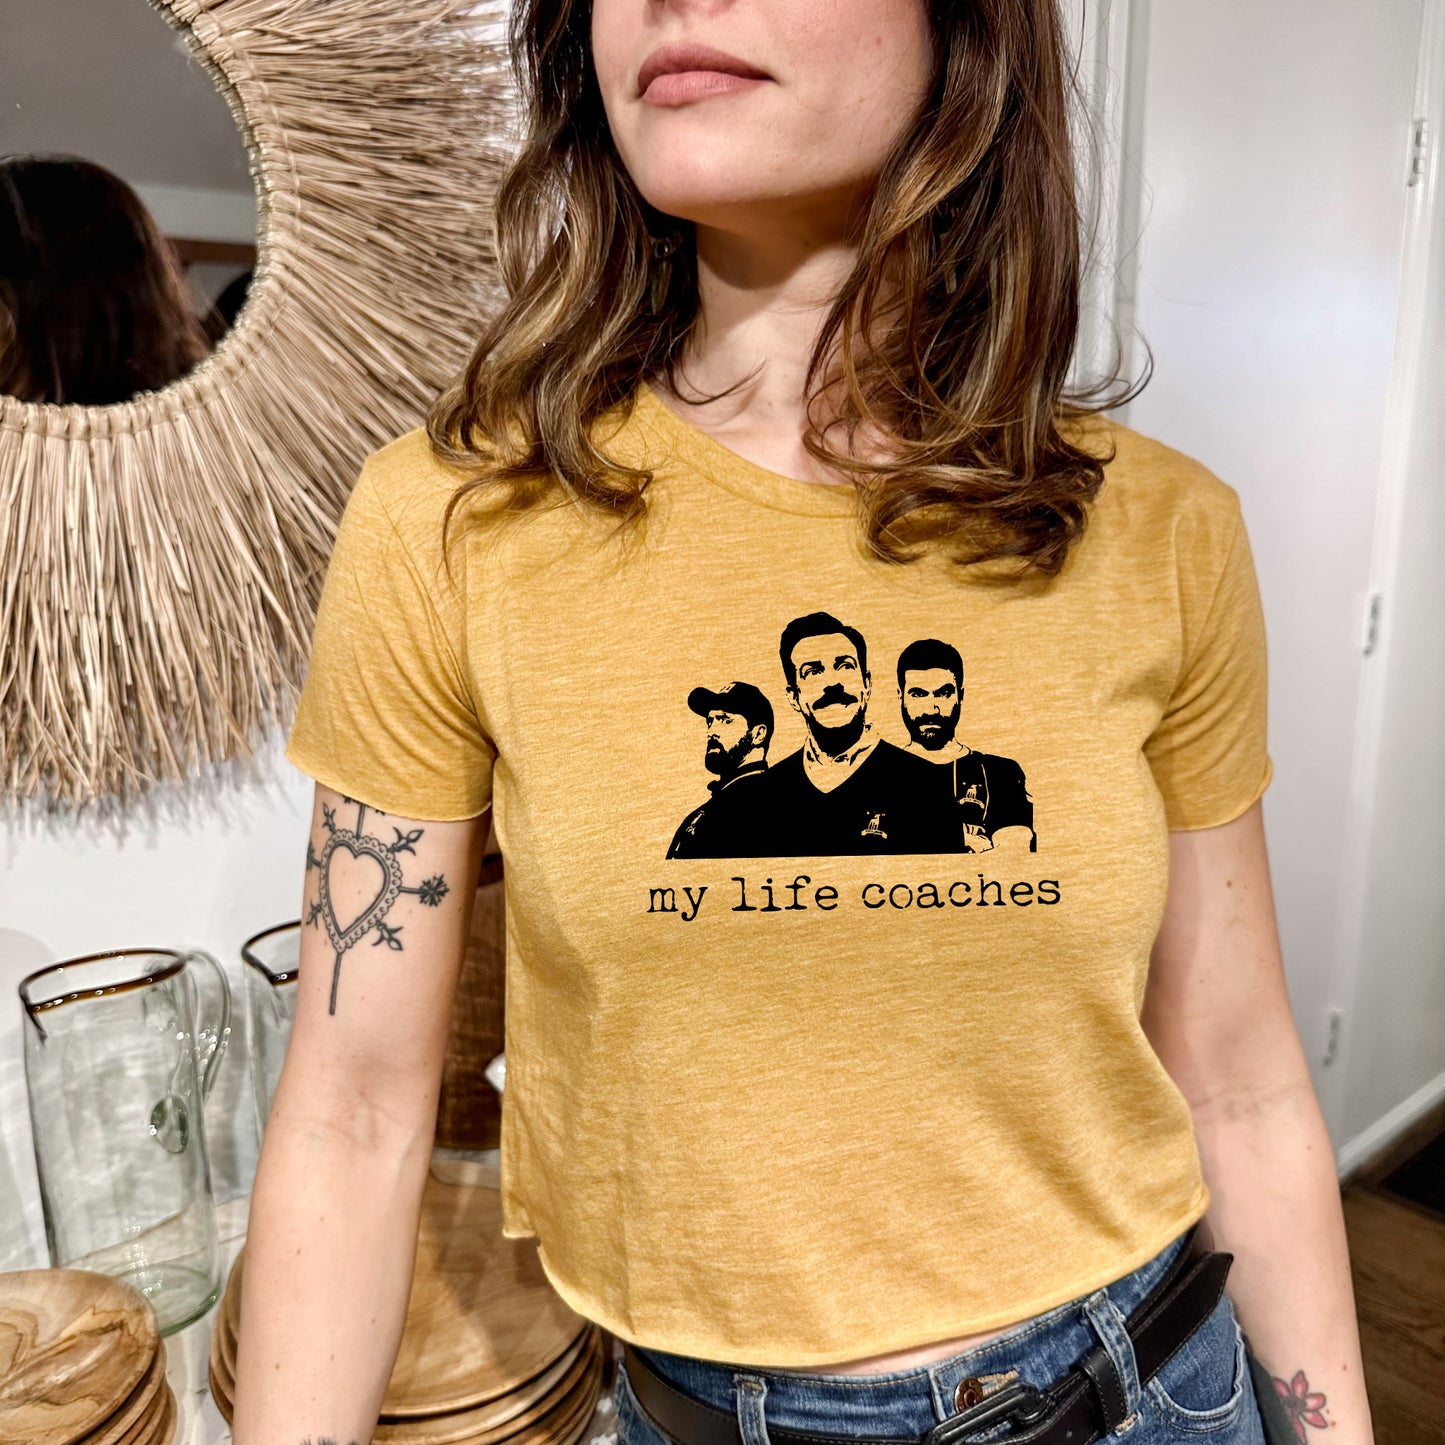 My Life Coaches (Ted Lasso) - Women's Crop Tee - Heather Gray or Gold